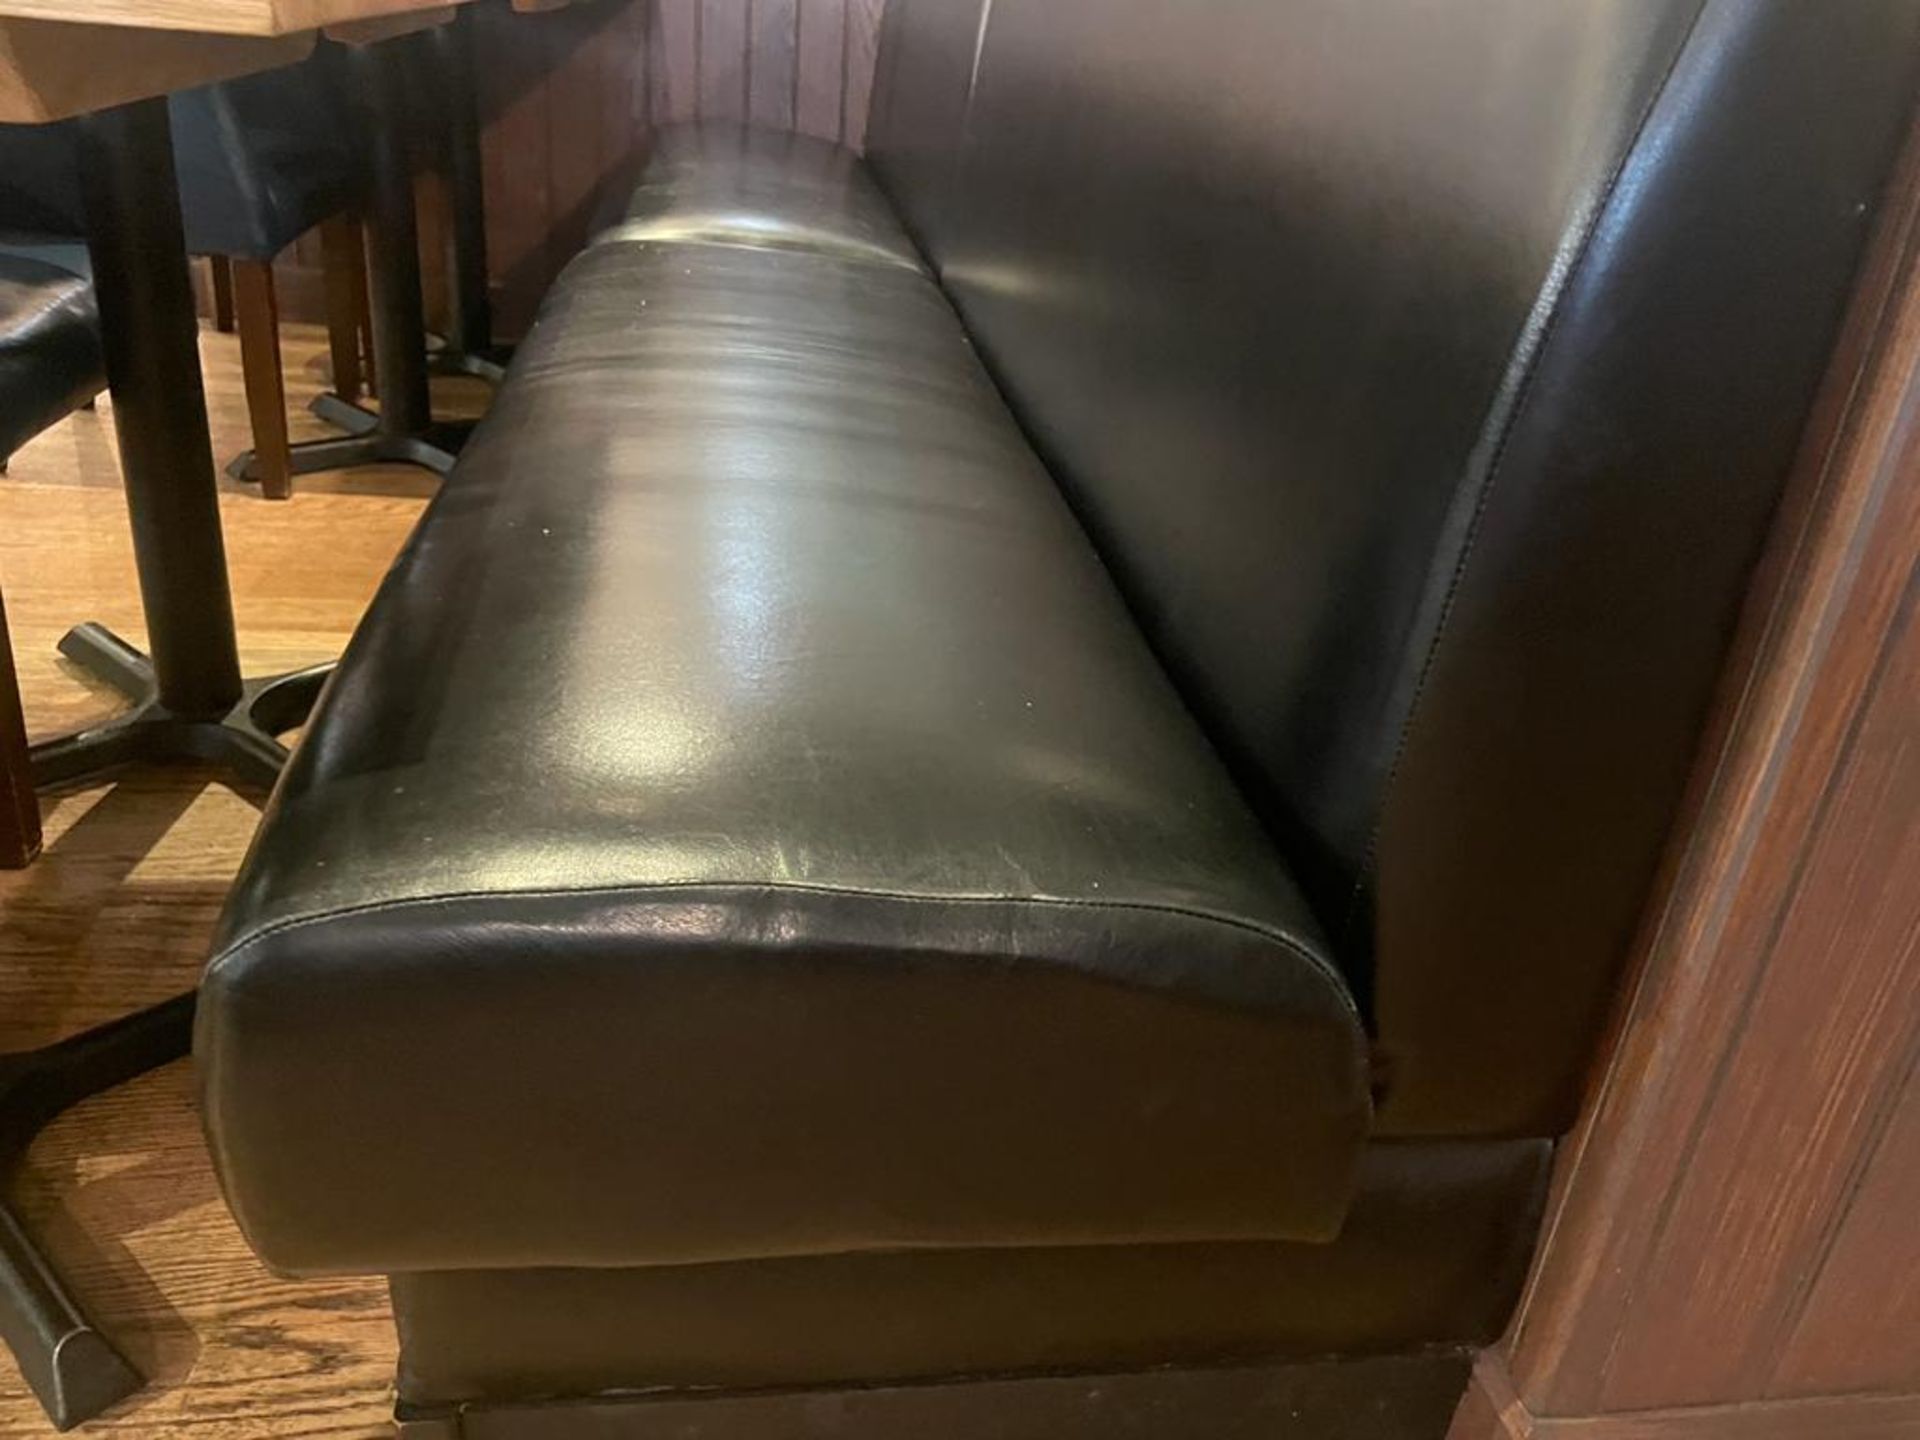 1 x Restaurant Seating Bench With a Black Faux Leather Upholstery - Approx 12ft in Length - Image 4 of 4